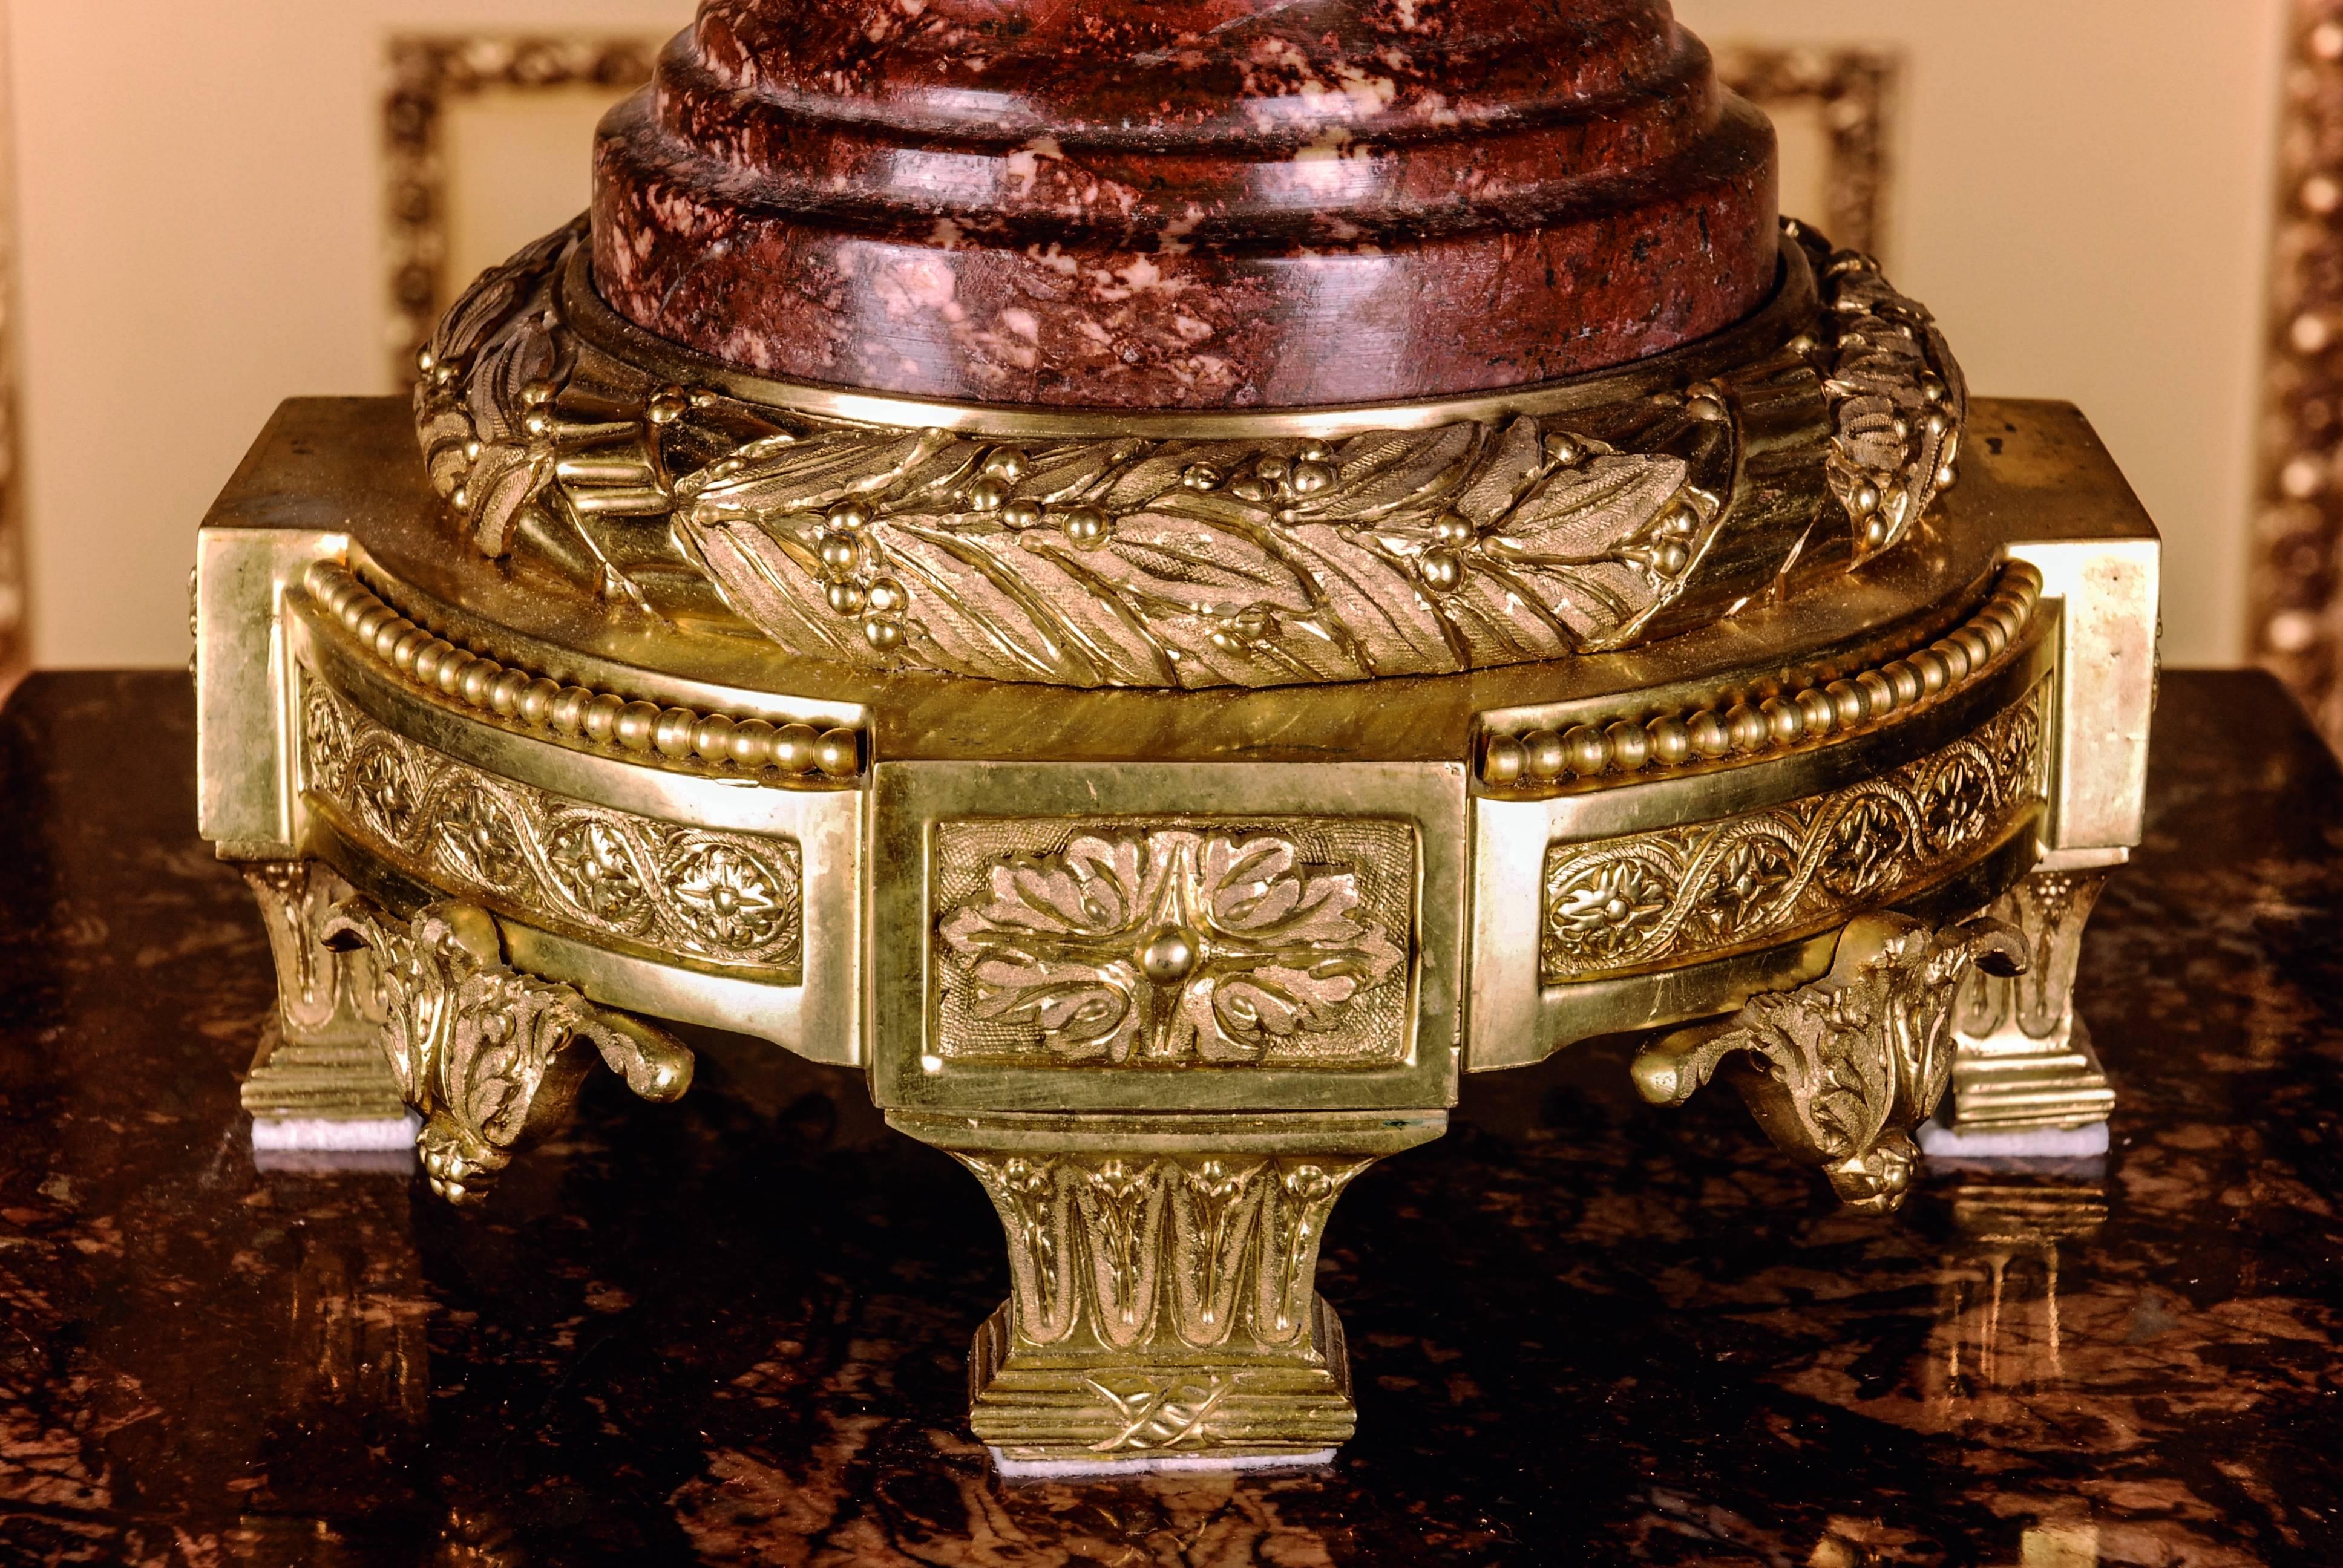 Bordeaux red marble with gray-white grain. Ovoider body with broad, ornamental and perforated hoop, decorated with chiselled Classicistic baskets, handles on both sides on high-rooted round foot, curly ascending lid crown. The chased bronze is